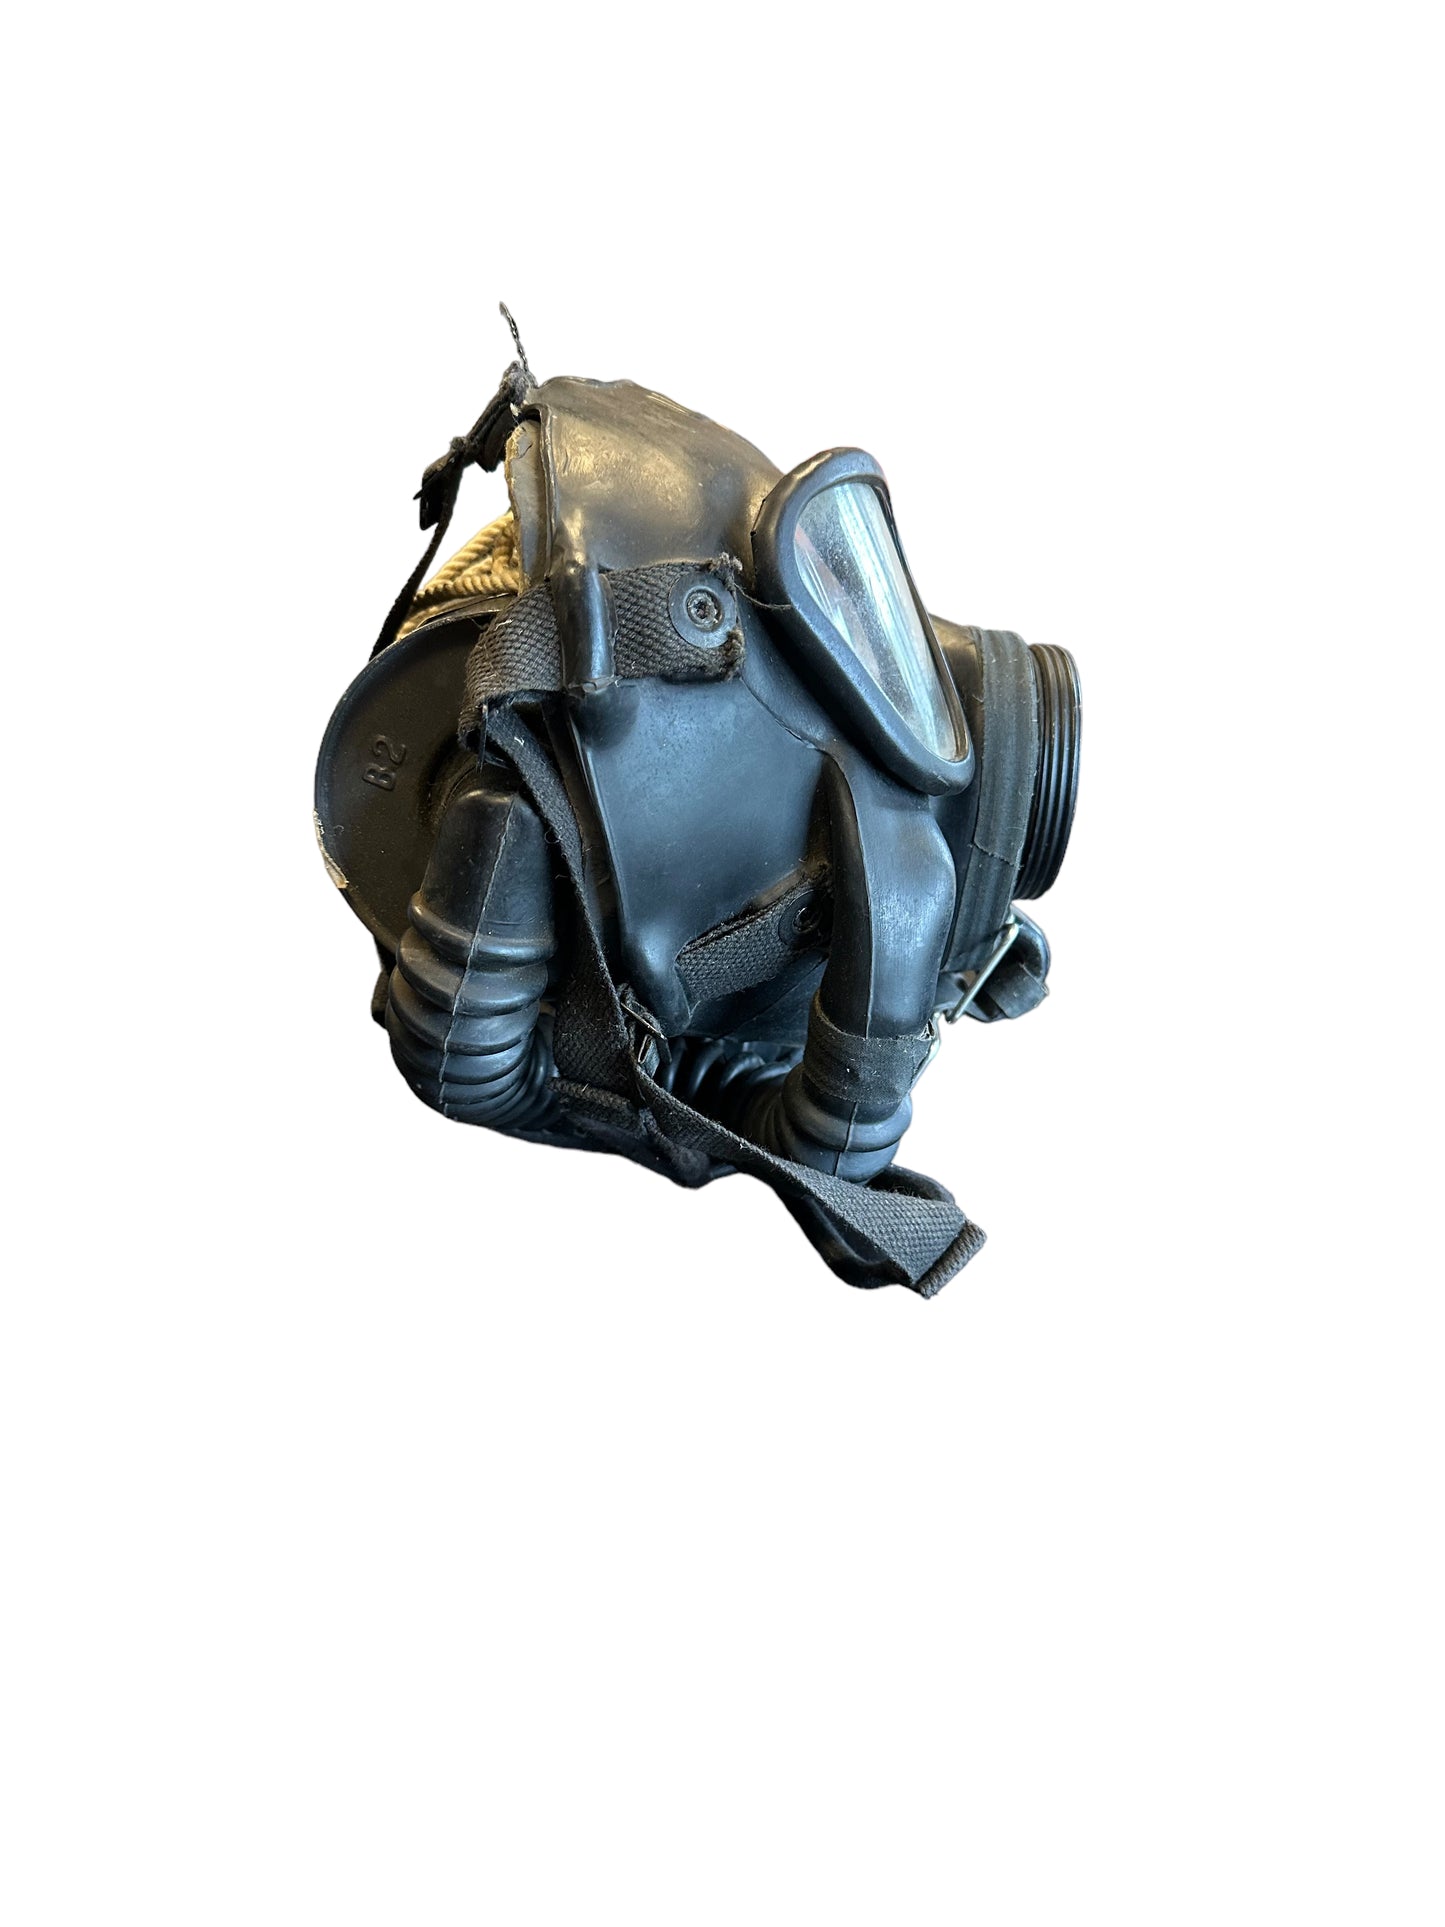 Gas-20 Gas Mask USN MSA With Hose L2T and B2 canister